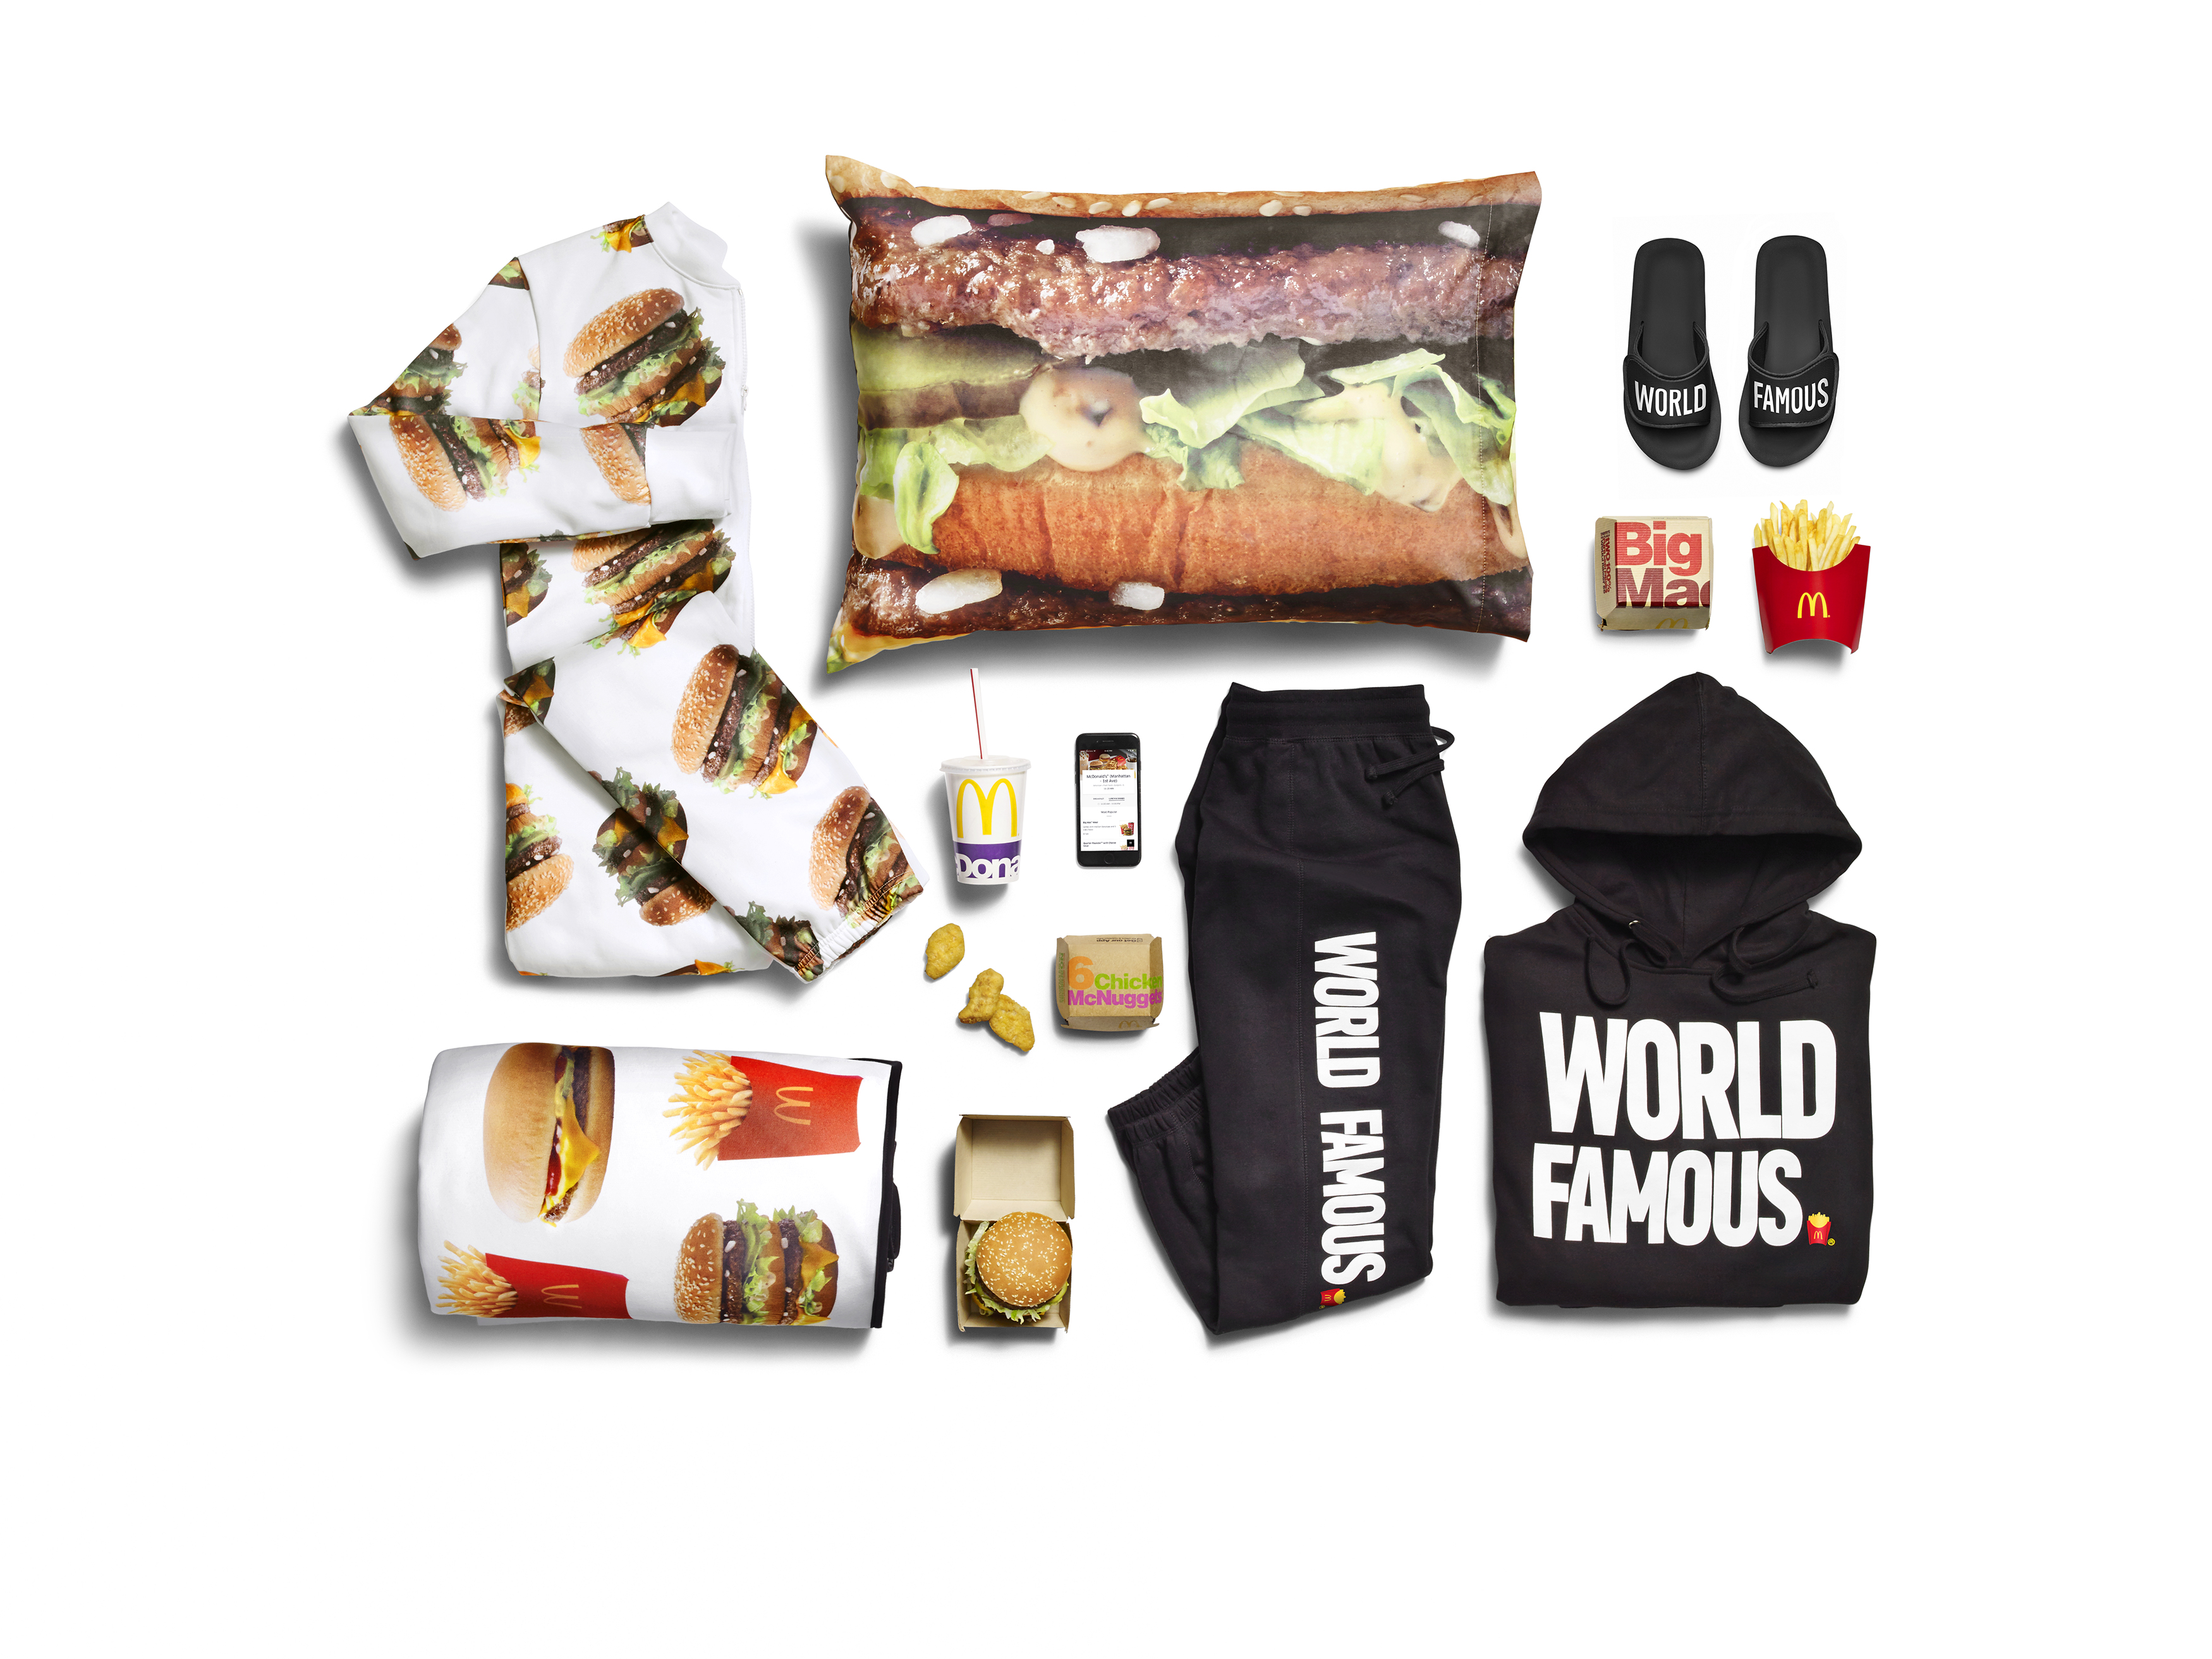 McDonalds has also had a go at apparel with their limited edition collection